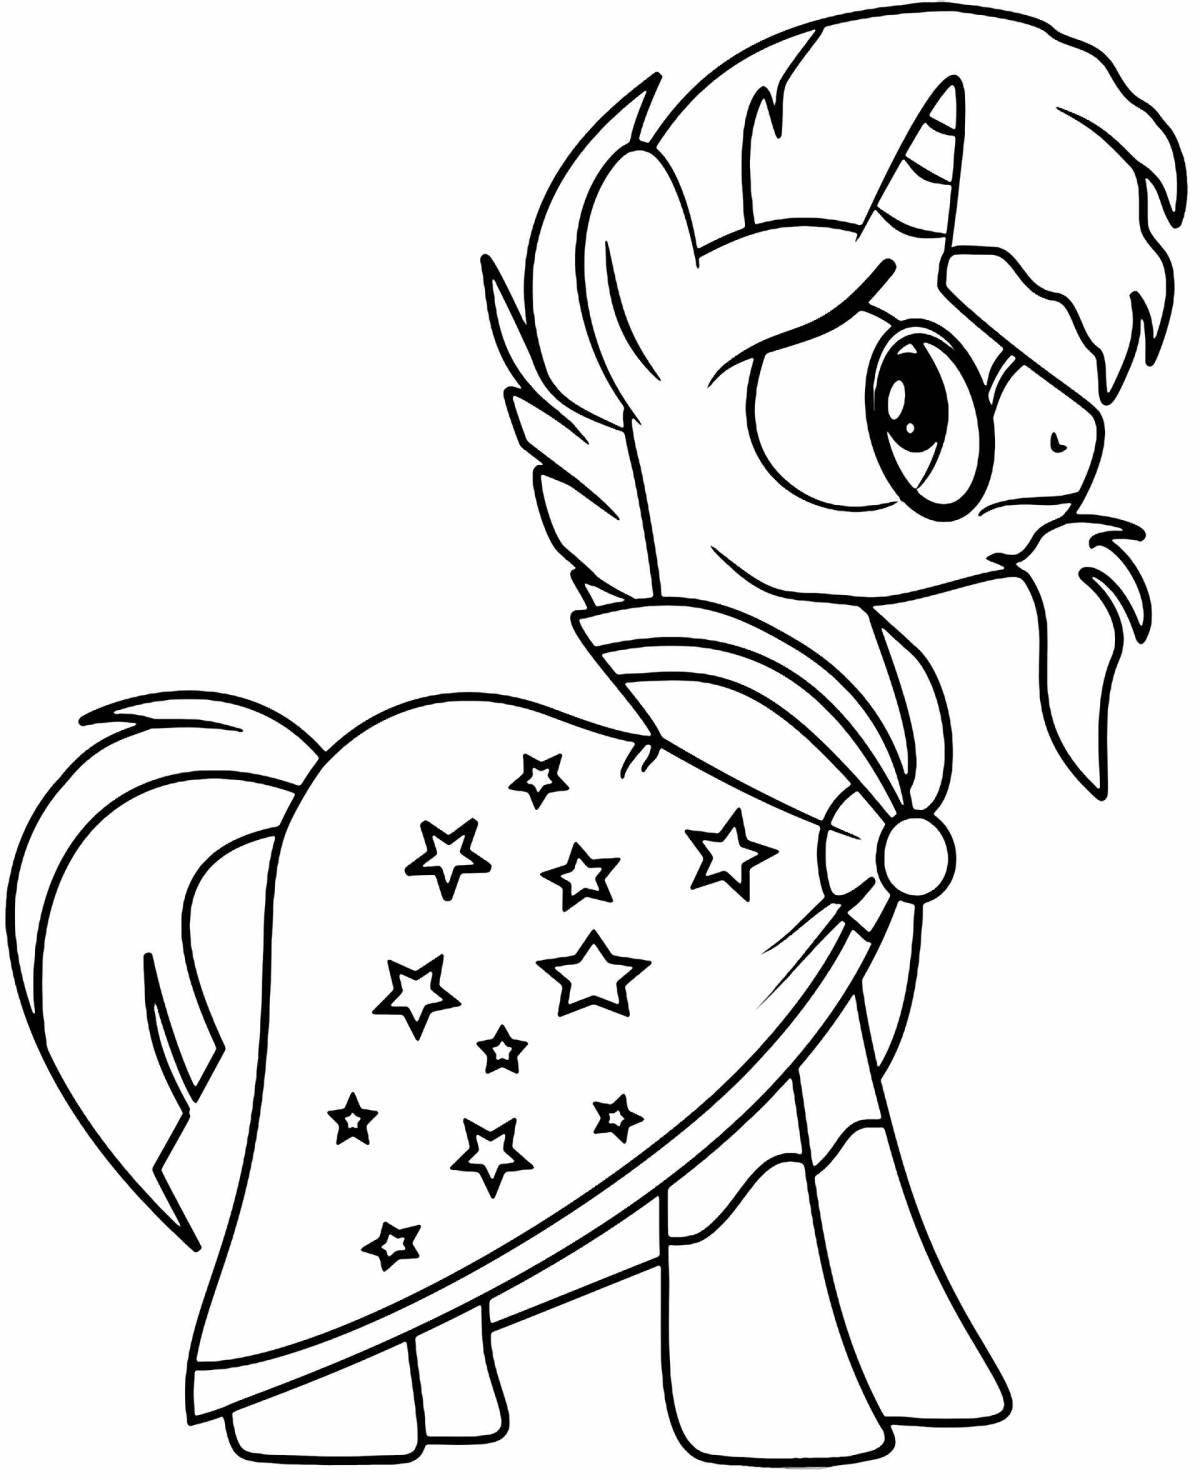 Glowing Storm Pony Coloring Page